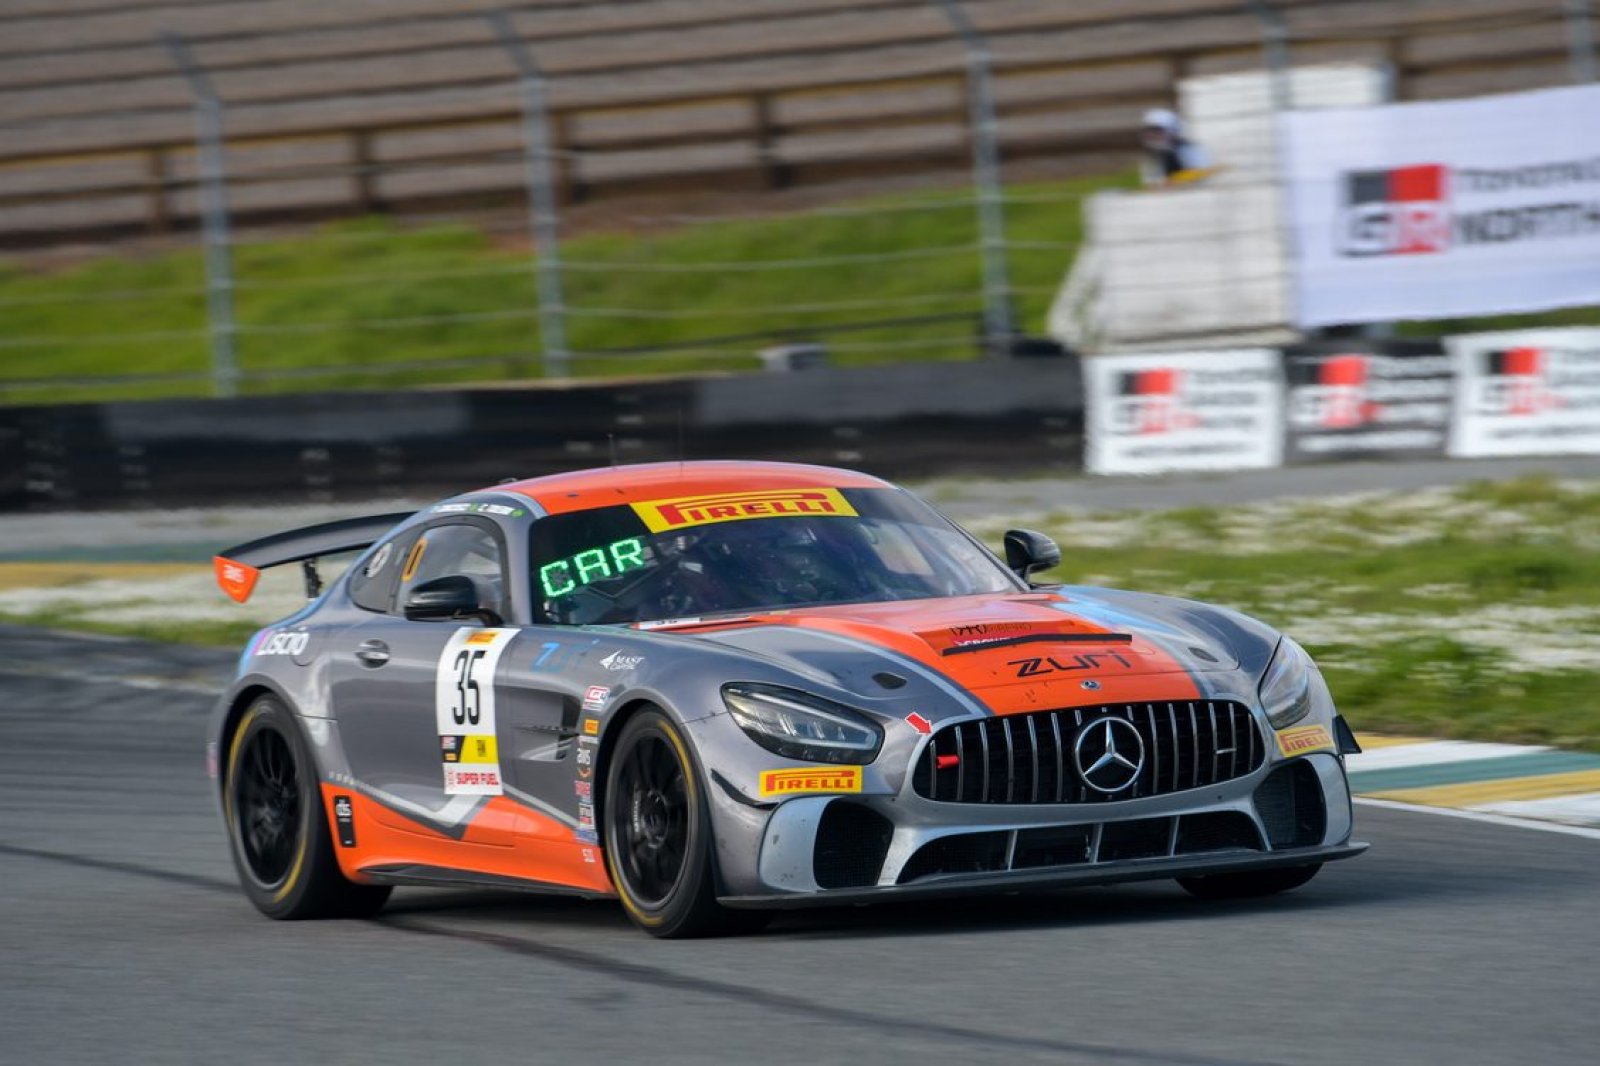 CONQUEST RACING LOOKING TO CARRY WINNING MOMENTUM INTO NOLA MOTORSPORTS PARK FOR THE SECOND ROUND OF GT4 AMERICA CHAMPIONSHIP